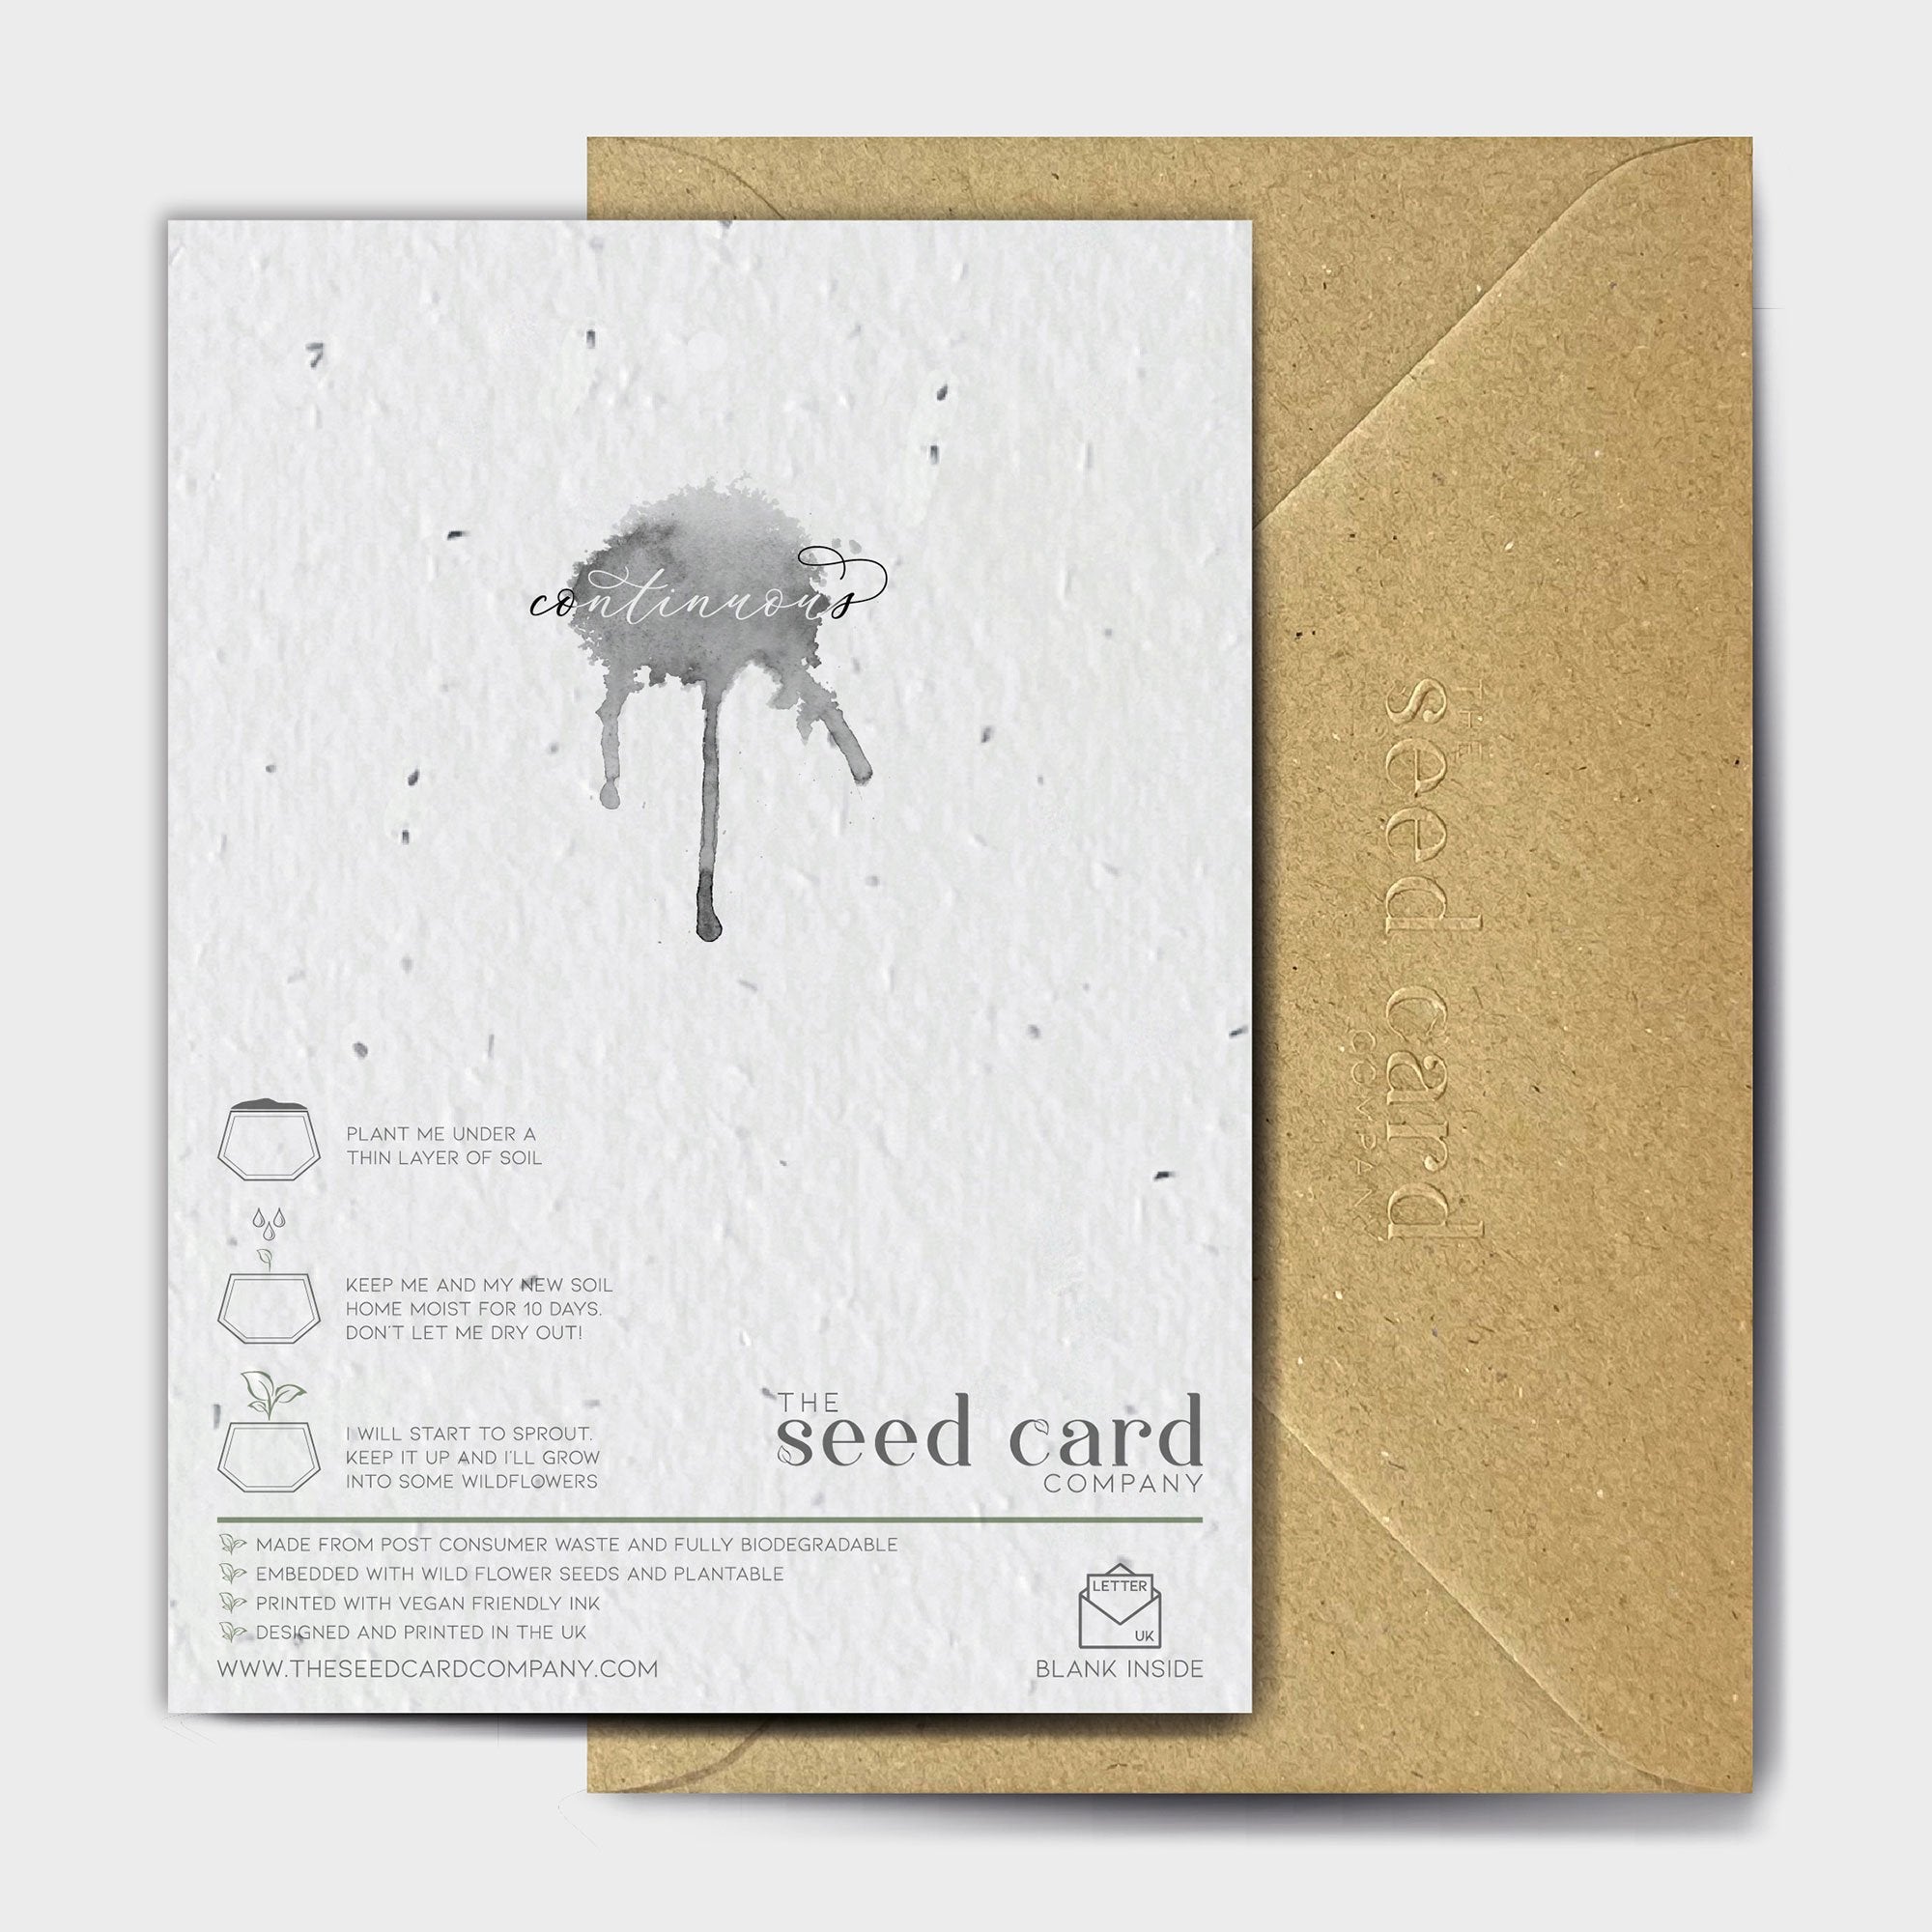 Shop online On The Prowl - 100% biodegradable seed-embedded cards Shop -The Seed Card Company